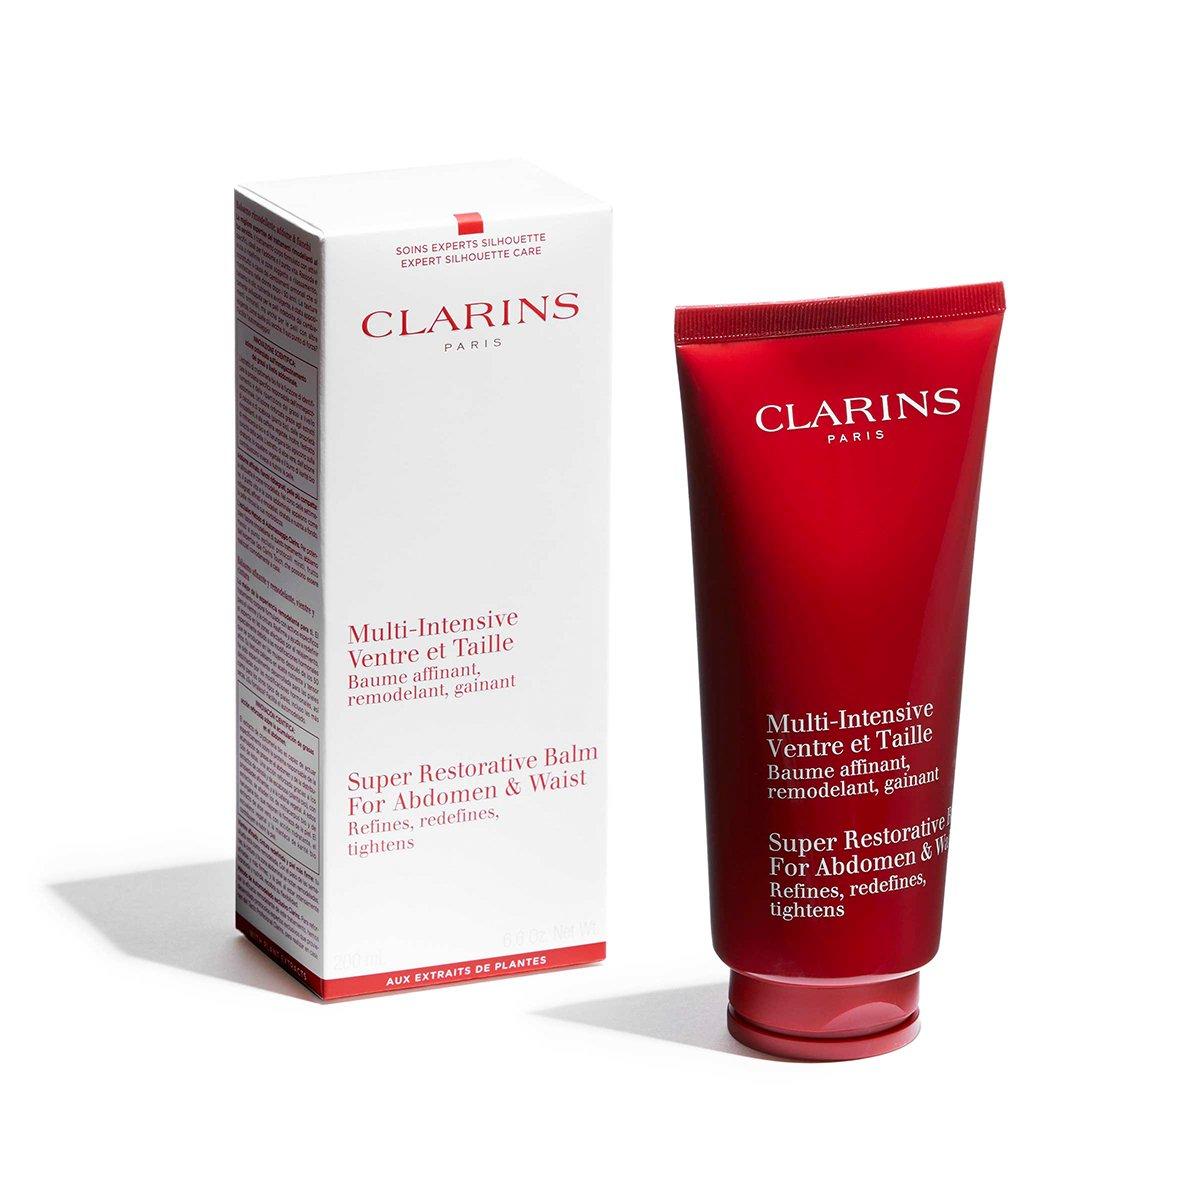 Clarins: Experience Silhouette Perfection!